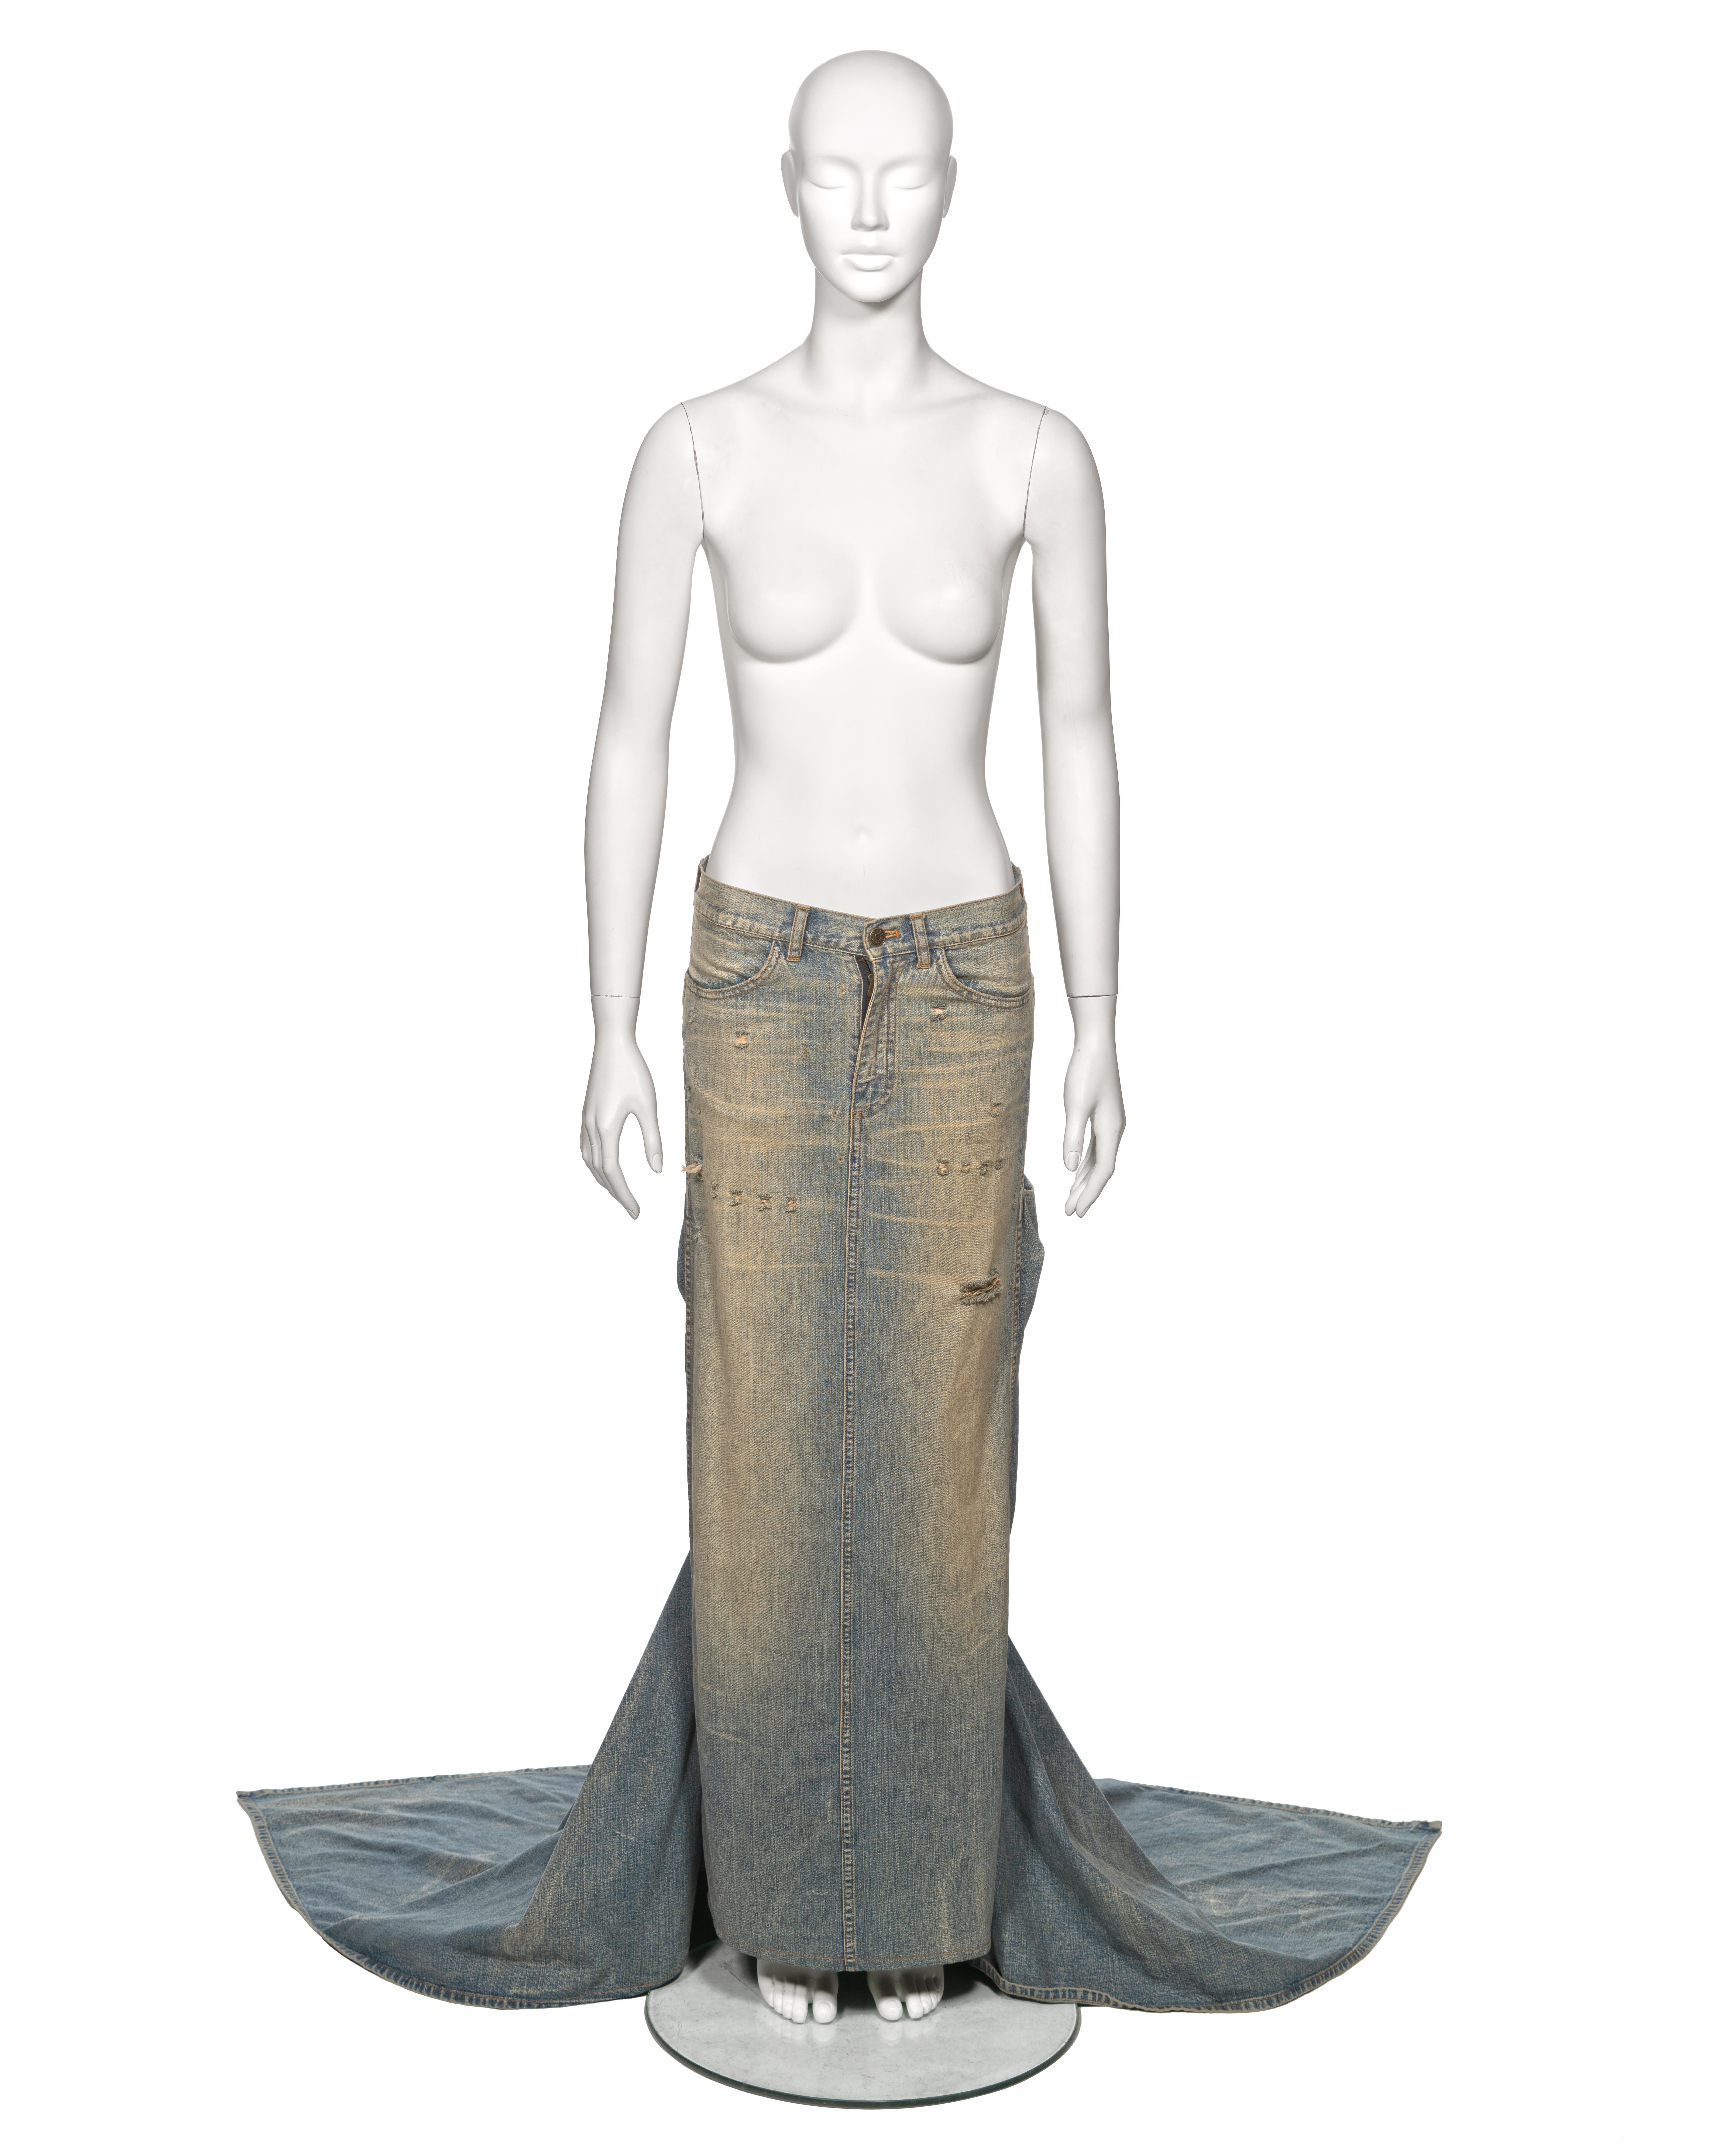 ▪ Archival Ralph Lauren Purple Label Runway Skirt
▪ Spring-Summer 2003
▪ Sold by One of a Kind Archive
▪ Crafted from distressed heavyweight sand-washed denim
▪ Boasts a floor-length silhouette with two long trains extending to the rear
▪ Features a